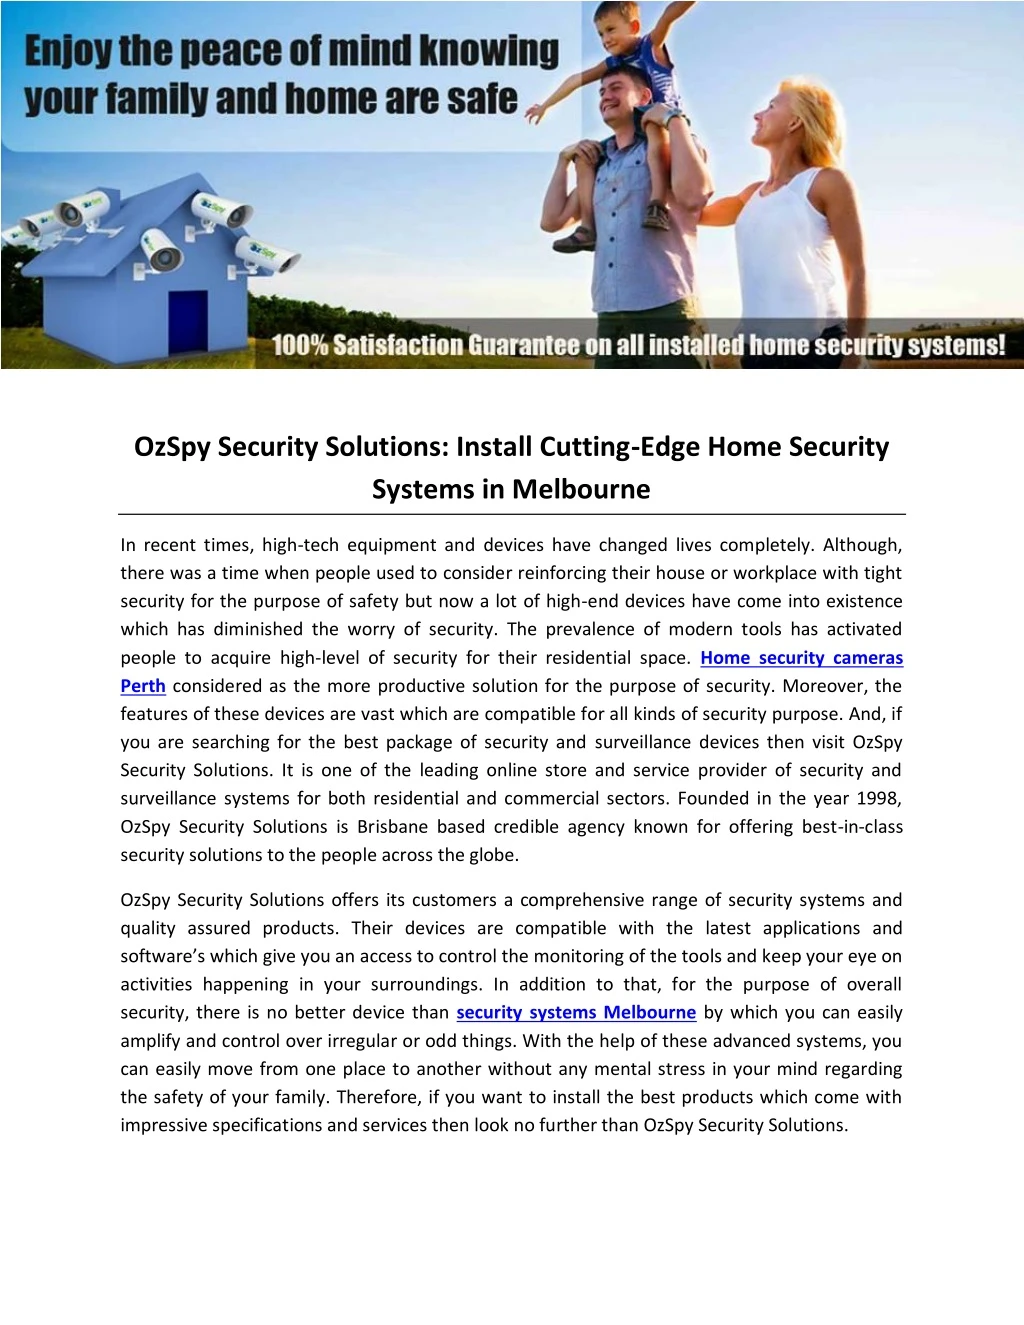 ozspy security solutions install cutting edge